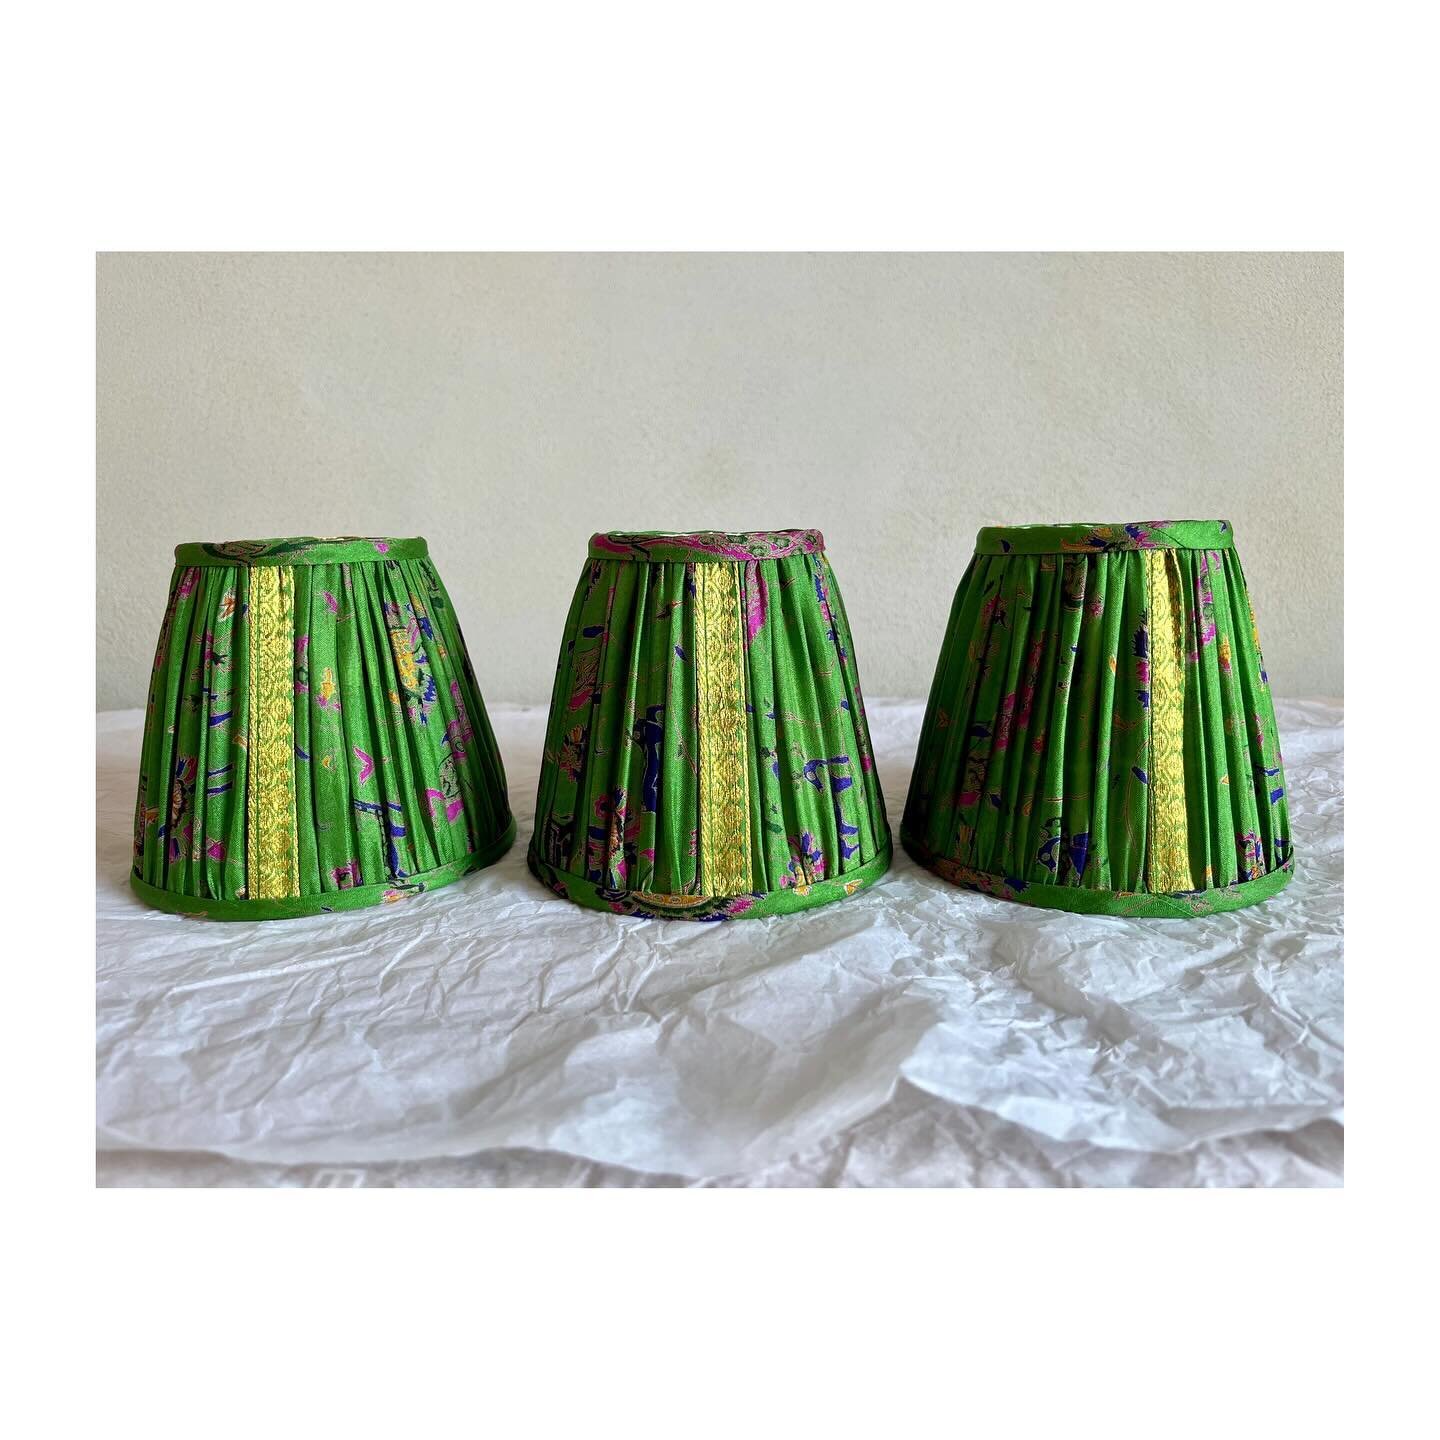 3 very delicious bespoke candle clip lampshades, just finished and on their way to their new home! Created from a vintage silk organza sari, with a rich gold trim. Yummy!! 🦚

#ediecroft #bespokelampshades